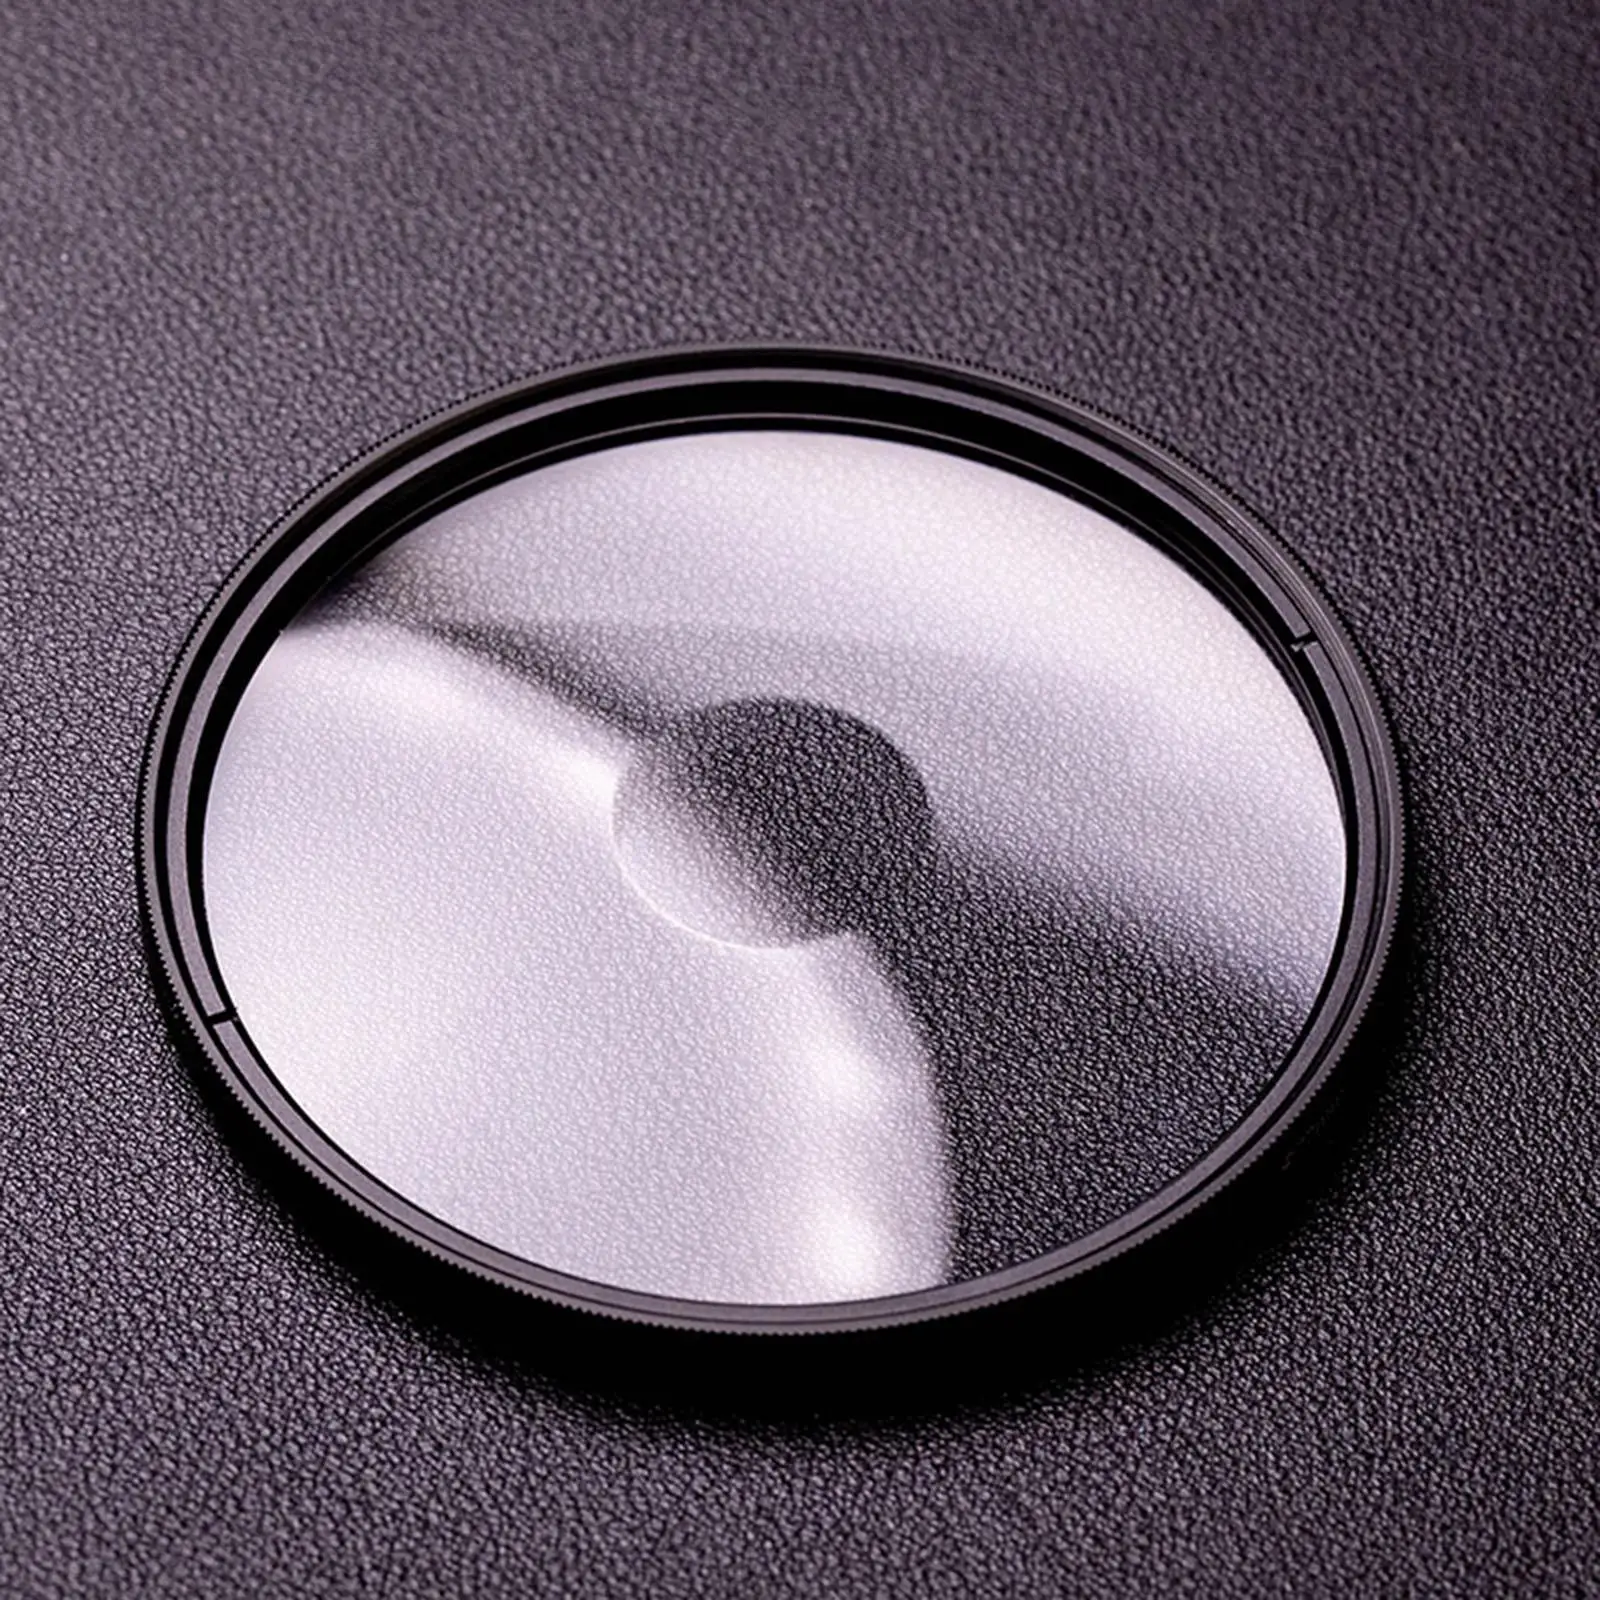 Camera Effect Filter for Photography Accessories, Lightweight Portable Glass Lens, Camera Glass 7mm